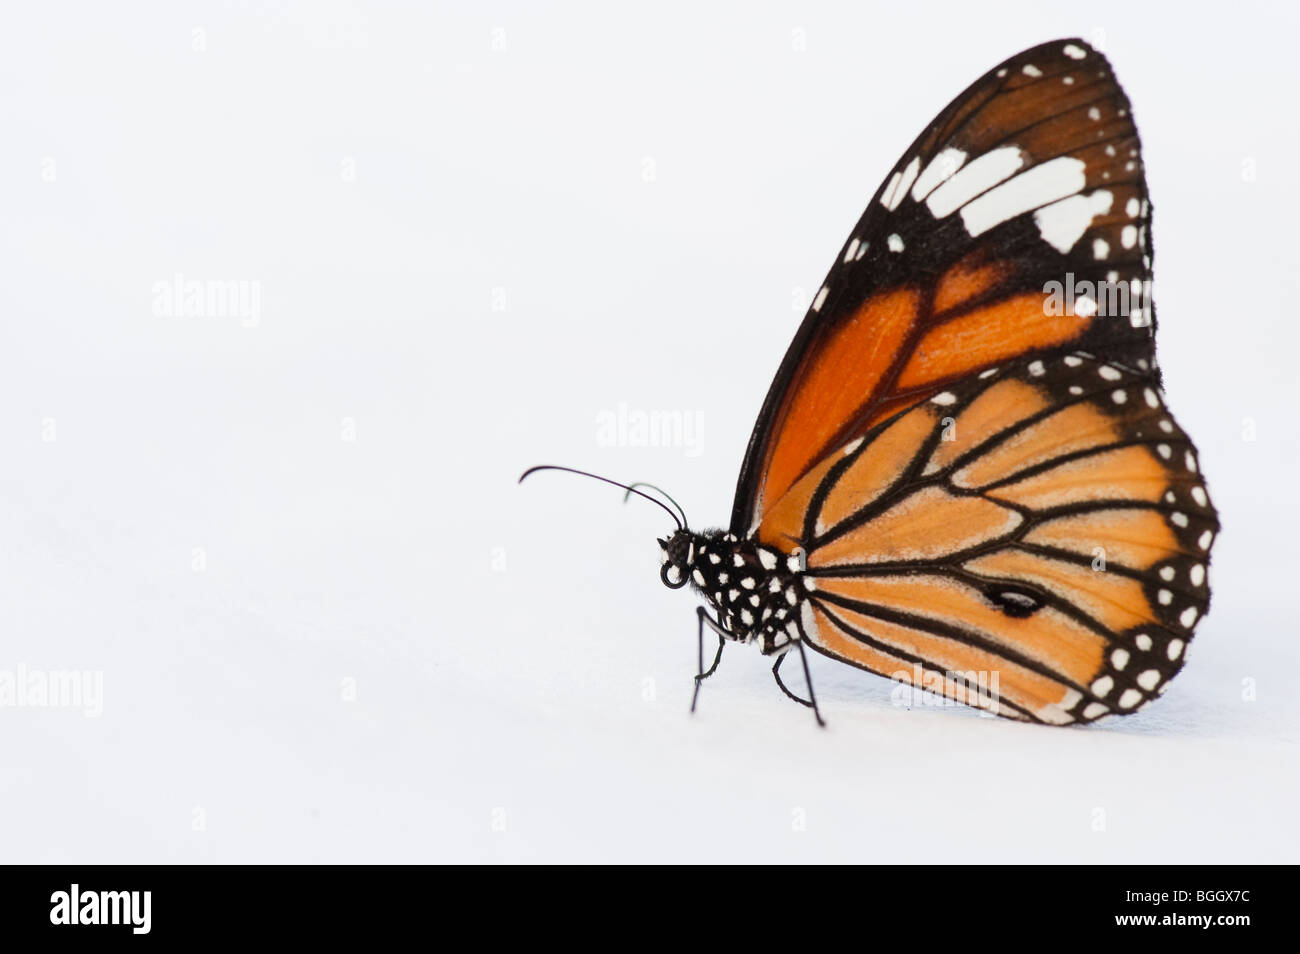 Danaus genutia. Striped tiger butterfly / Common tiger butterfly on a white background. India Stock Photo